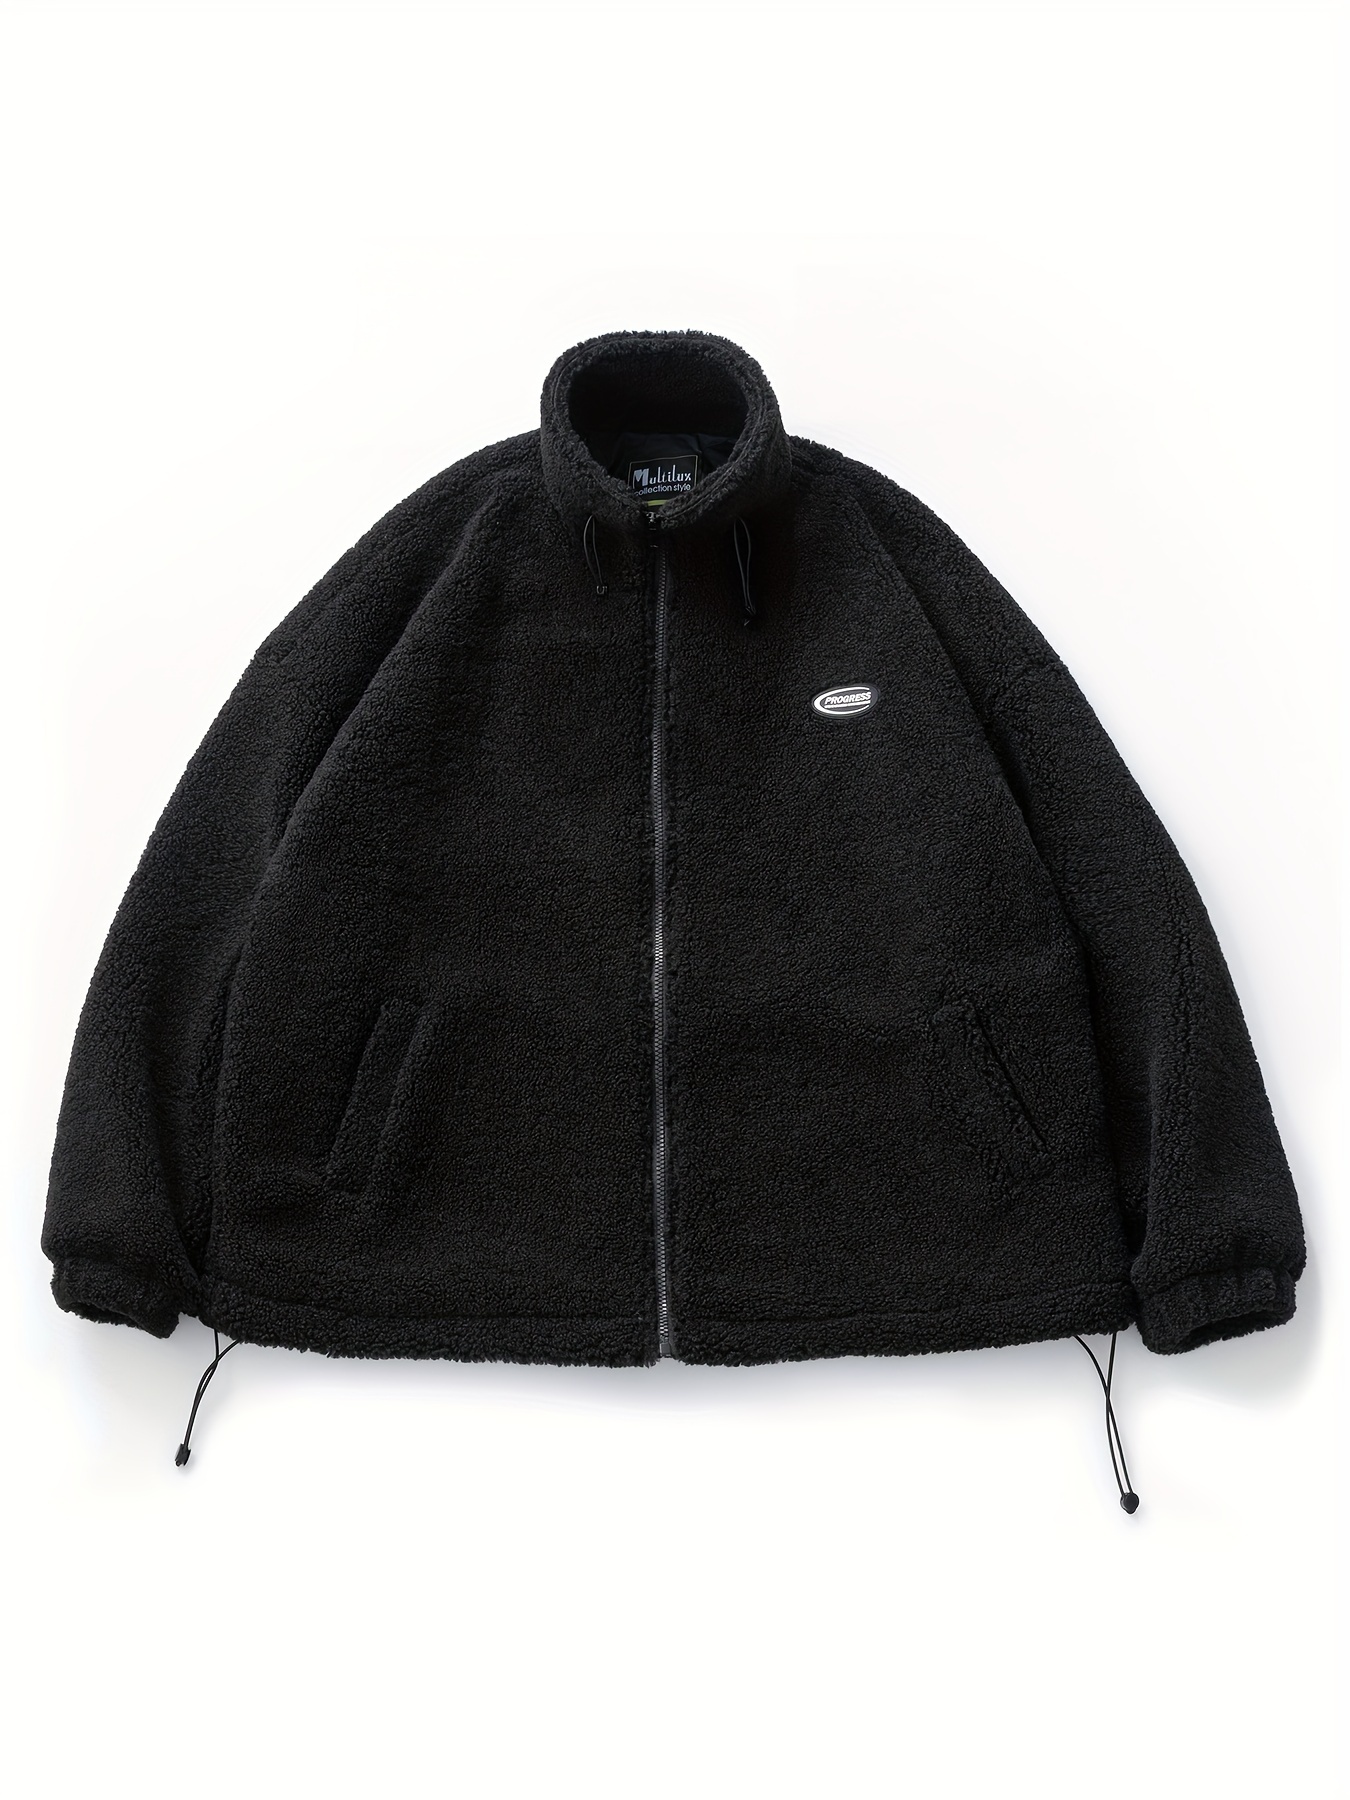 Plus Size Men's Fashion Band Collar Teddy Fleece Coat For Autumn/winter,  Oversized Sherpa Jacket For Males, Men's Clothing